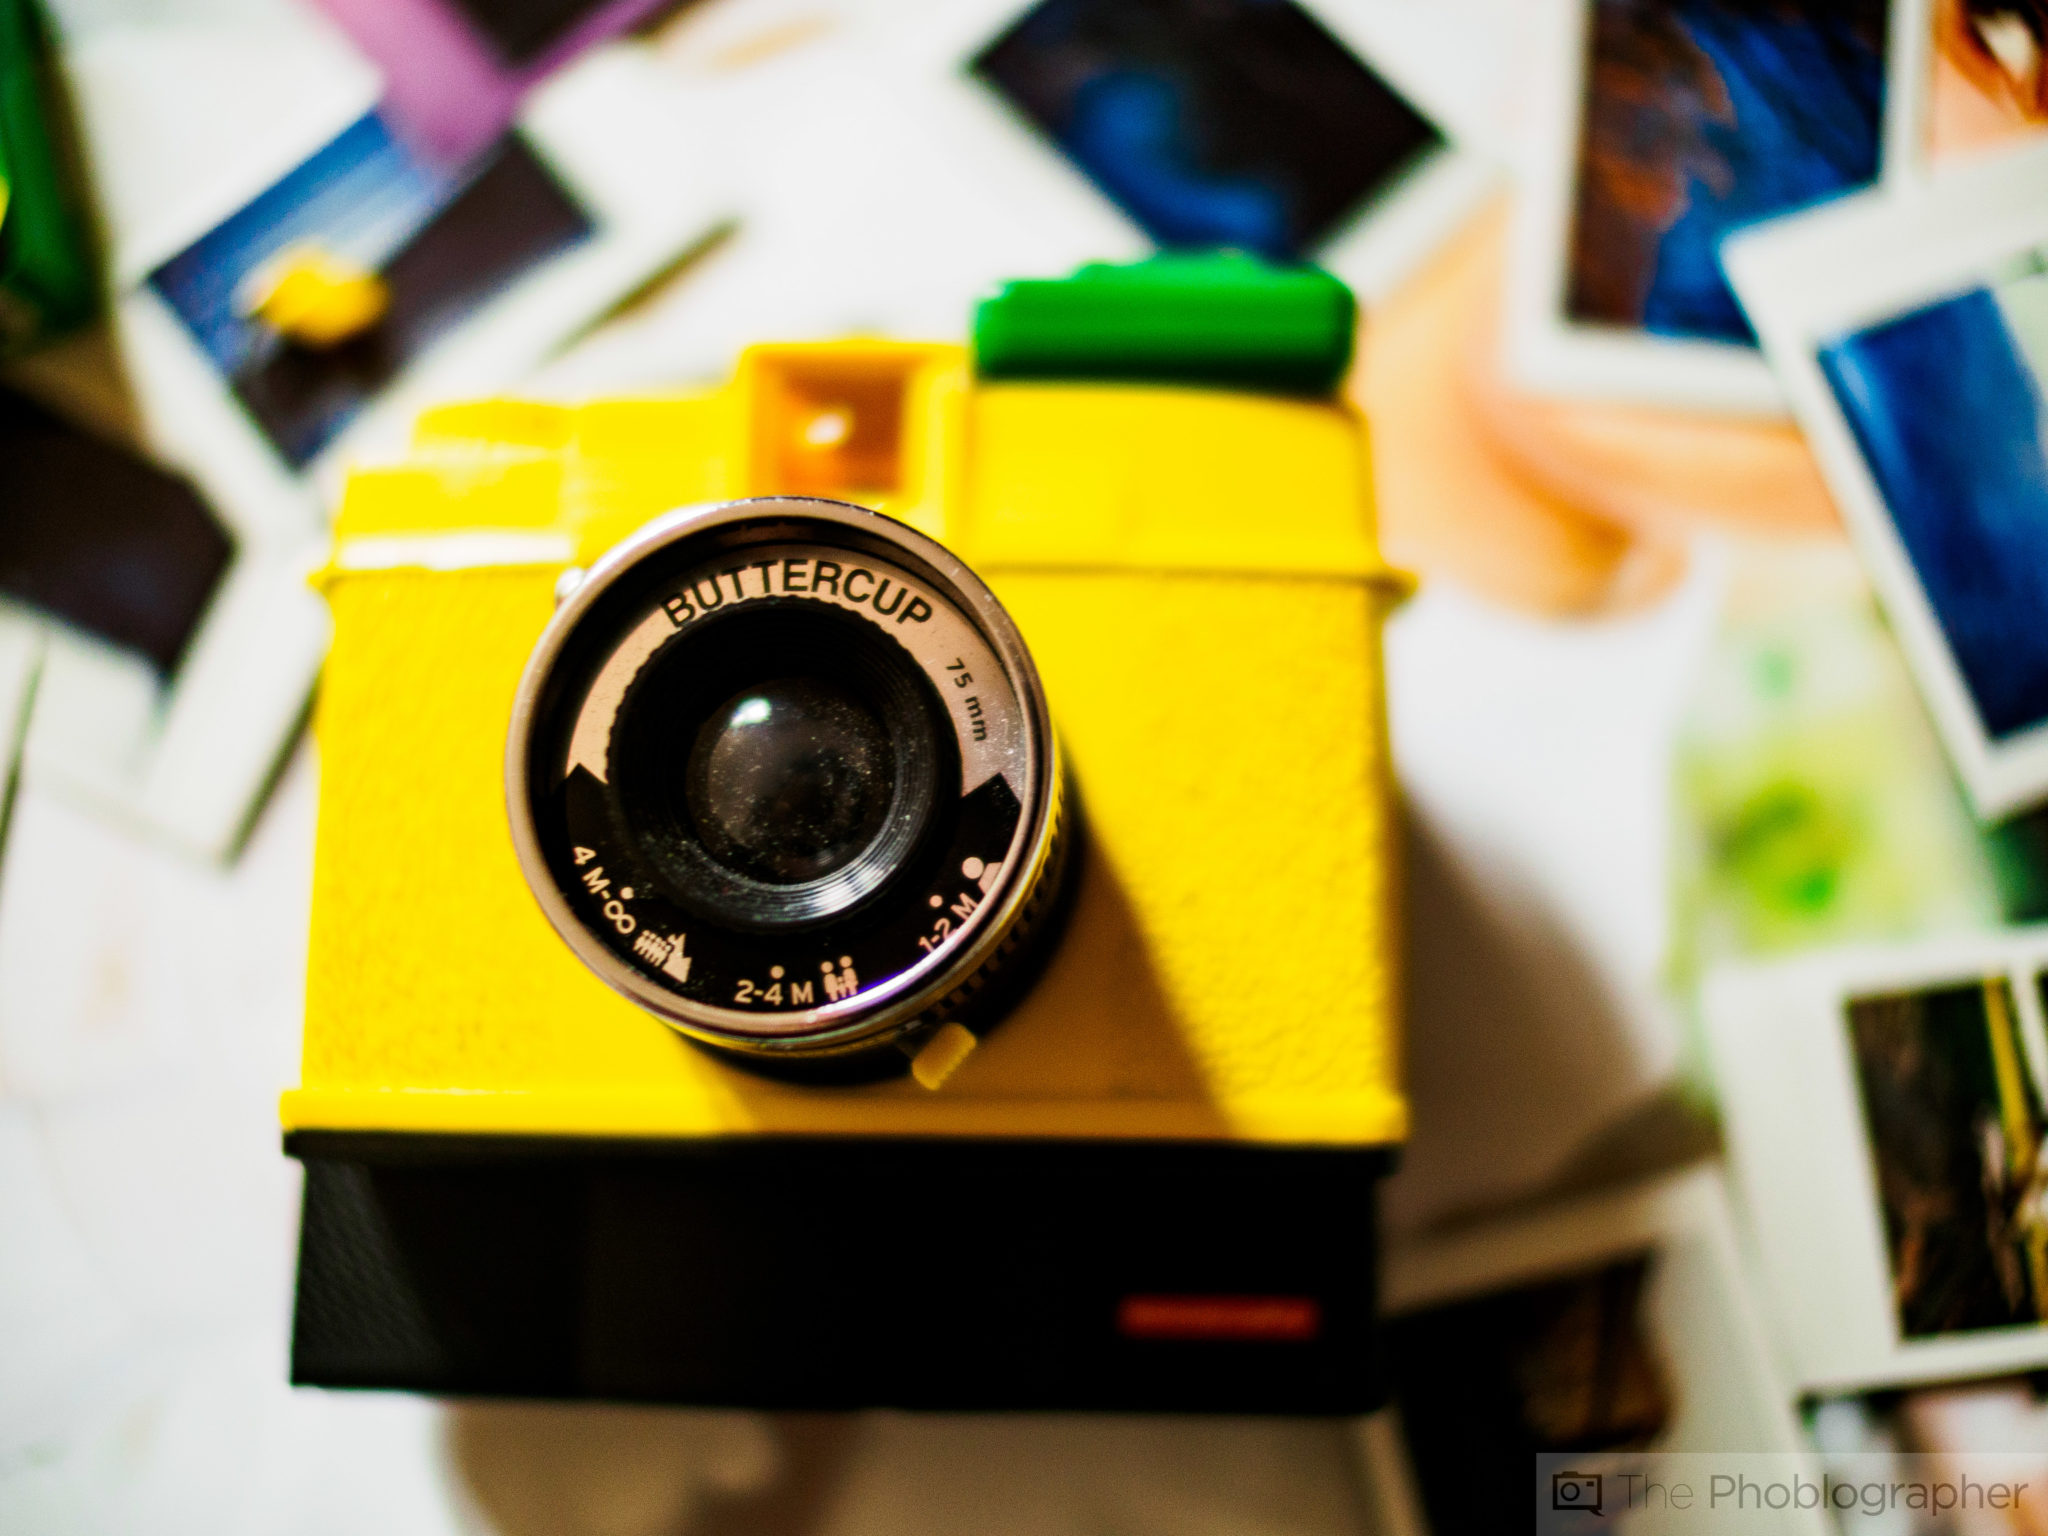 Review: Lomography Diana F+ Instant Film Back